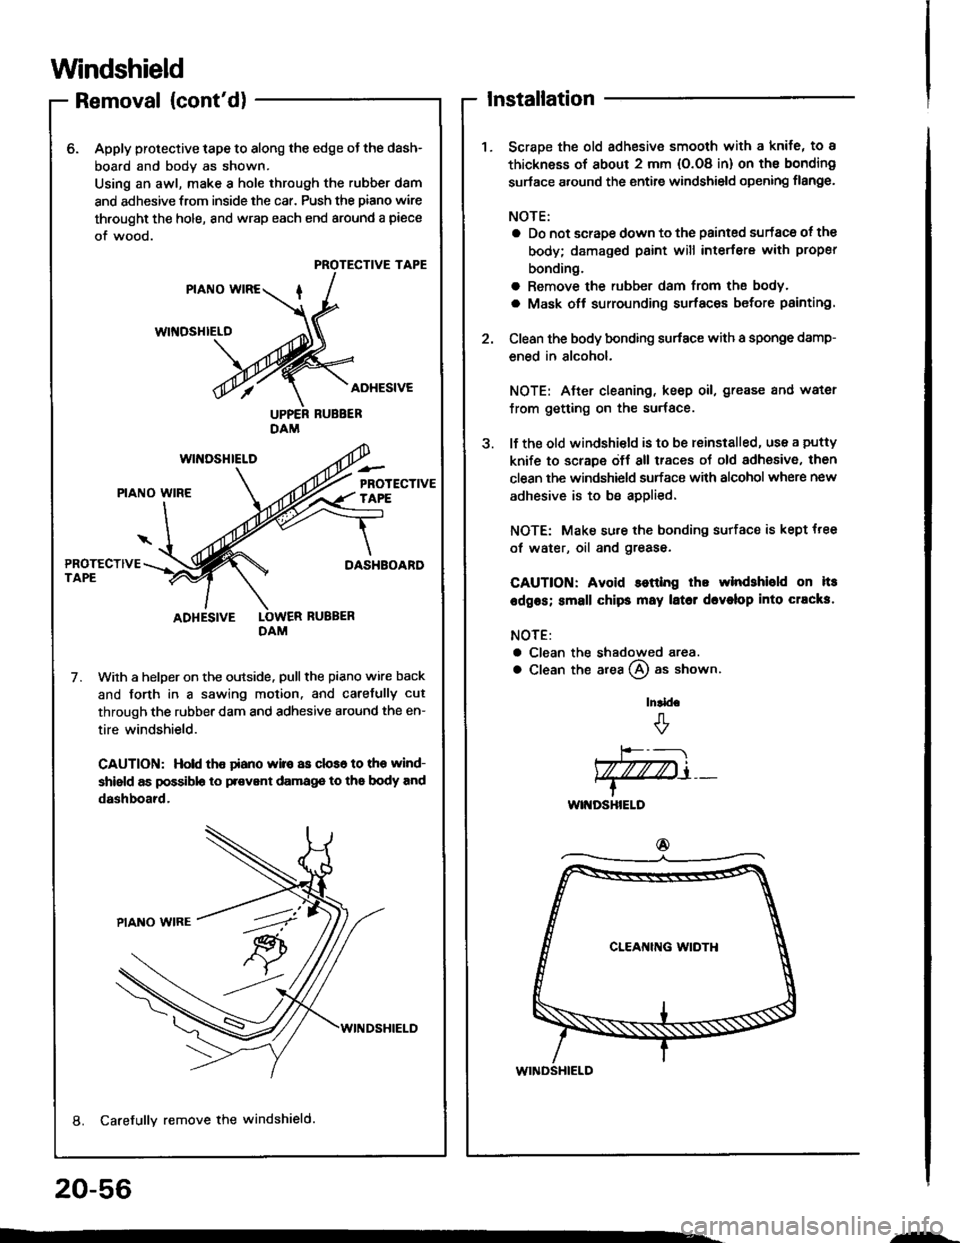 ACURA INTEGRA 1994  Service Repair Manual Windshield
Removal (contd)
6. Apply protective tape to along the edge ot the dash-
board and body as shown.
Using an awl, make a hole through the rubber d8m
and adhesive from inside the car. Push the